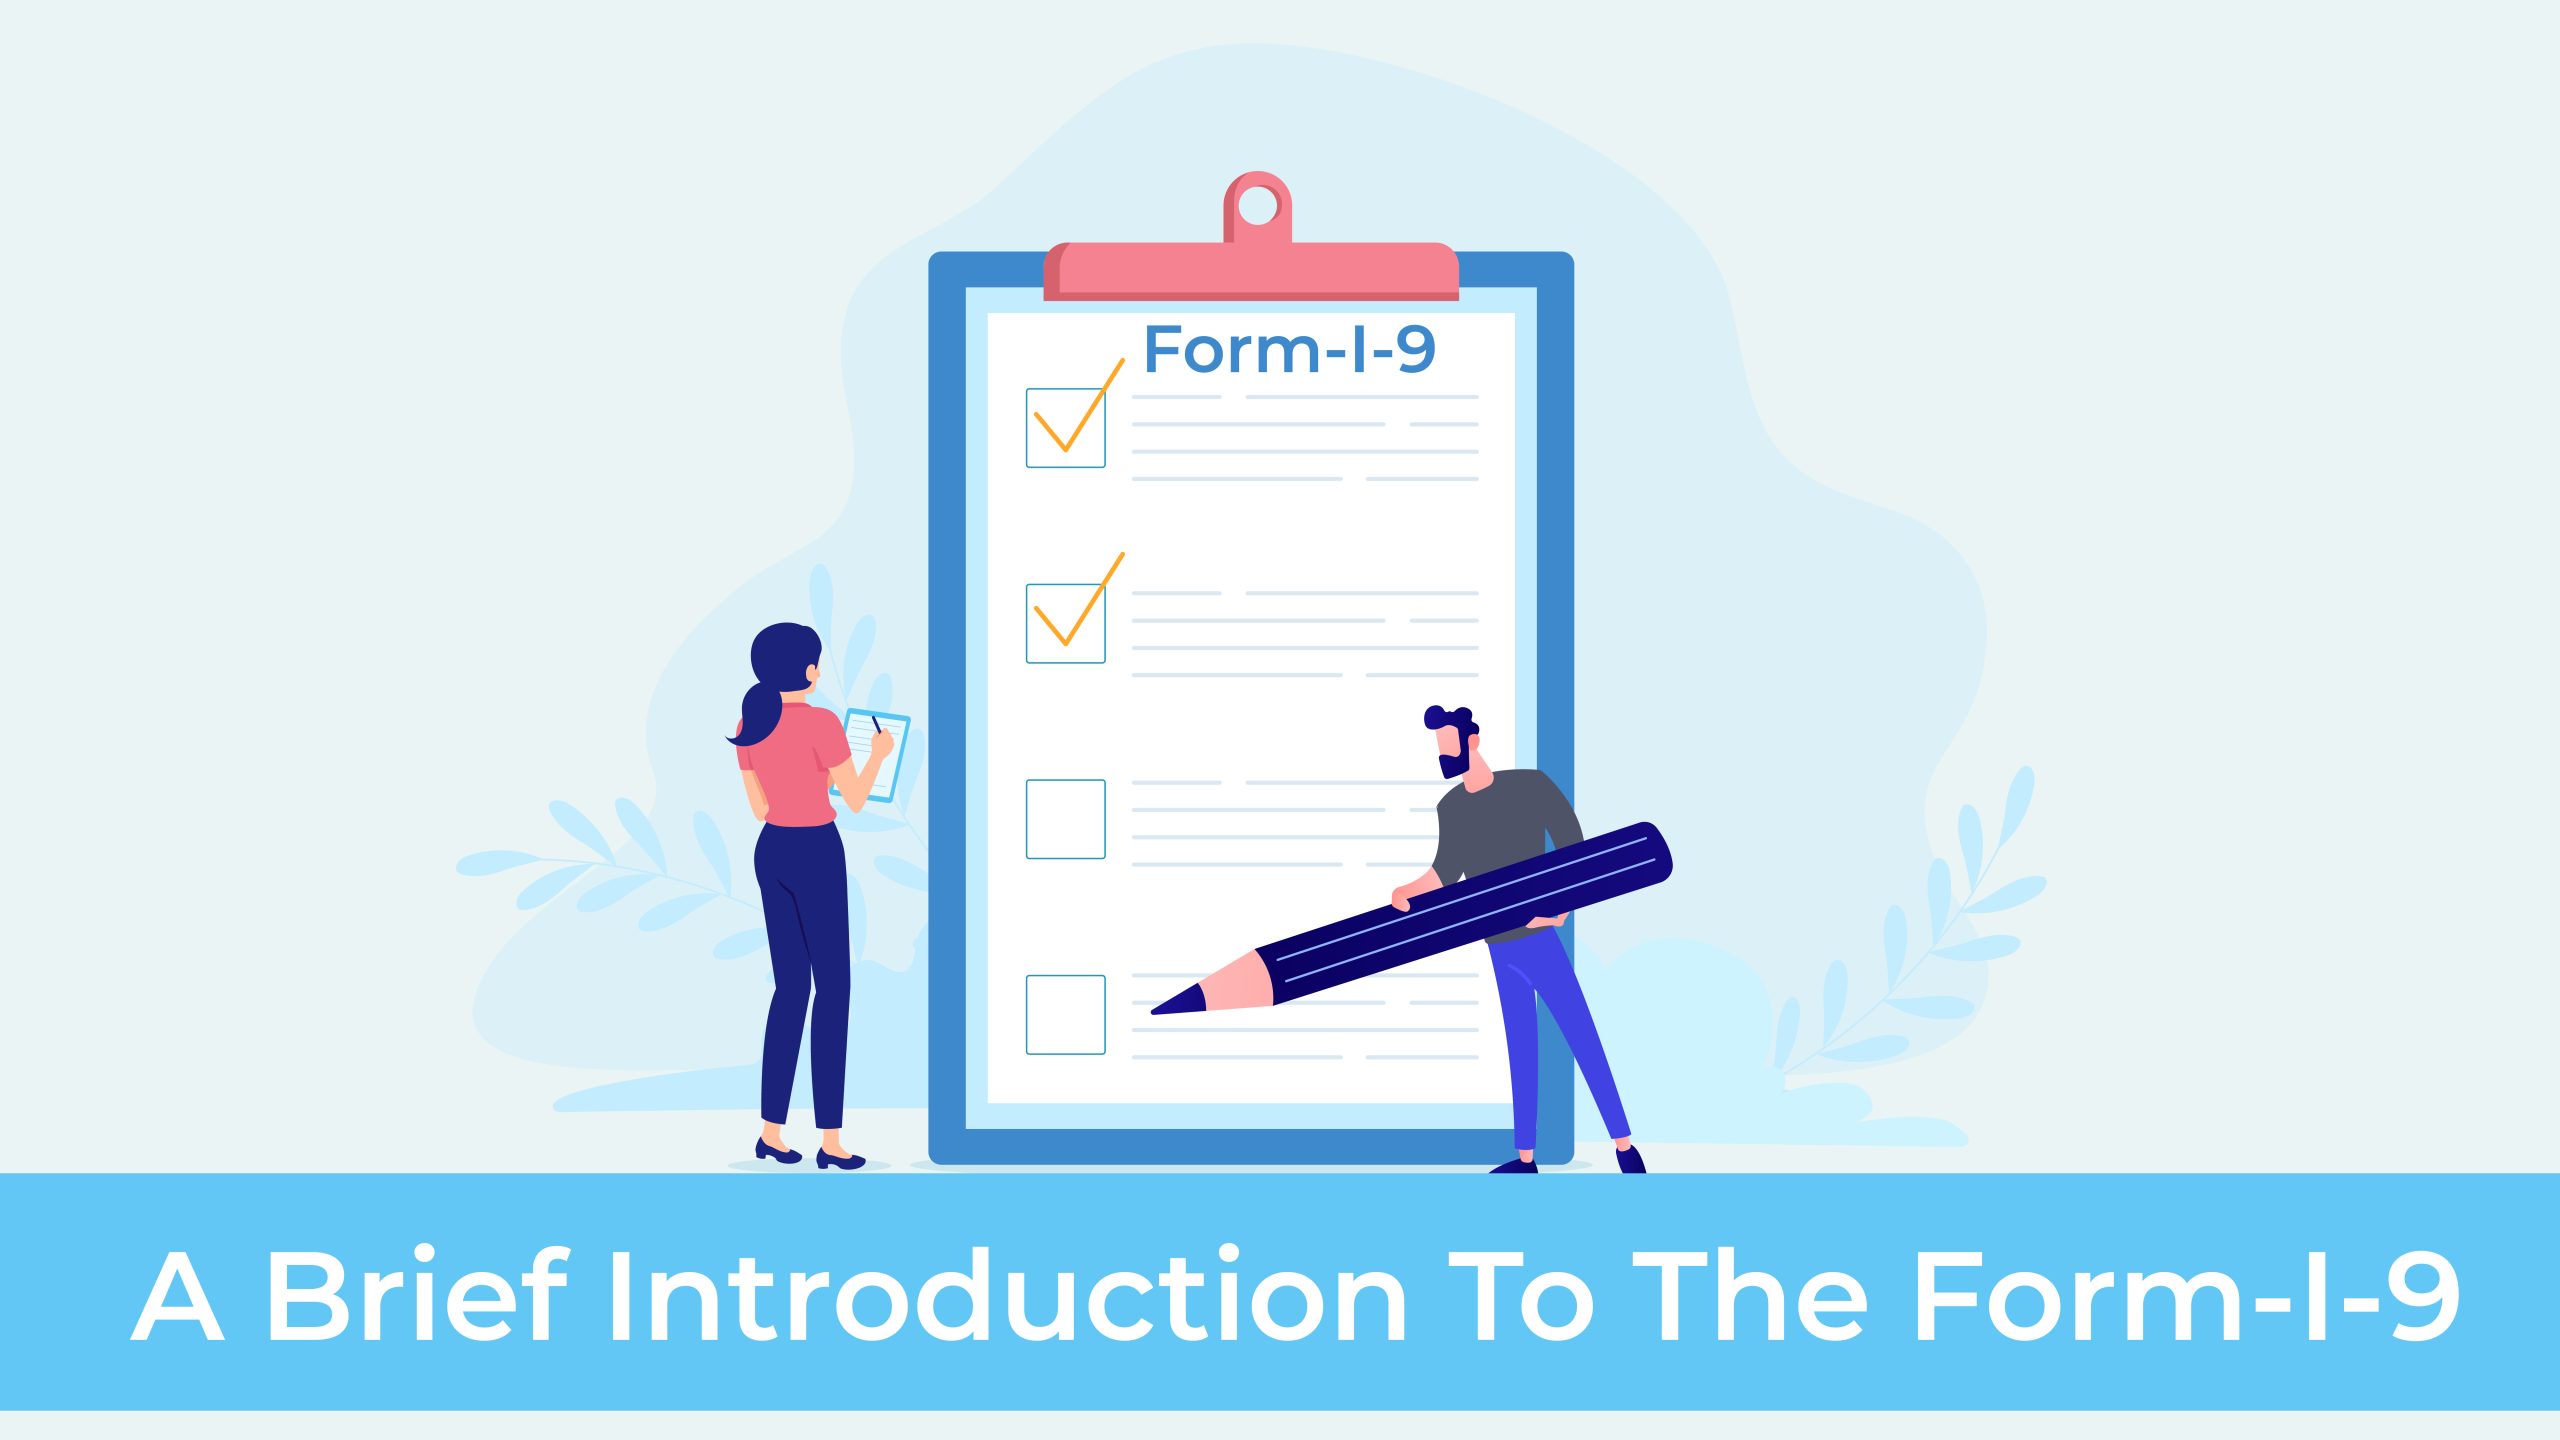 A Brief Introduction To The Form-I-9